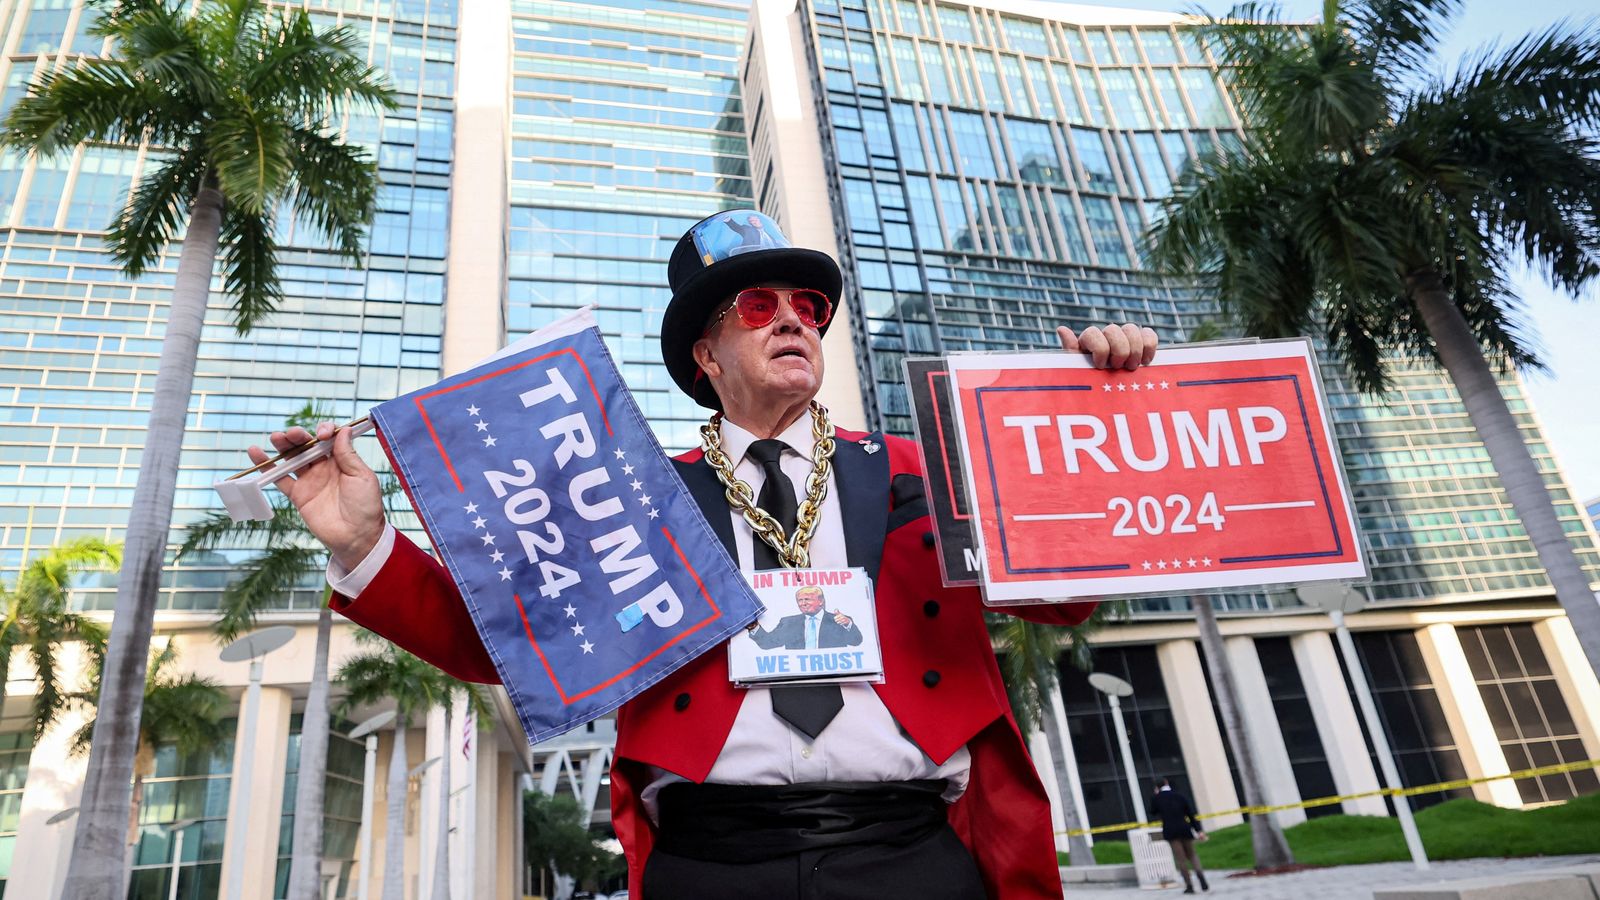 Florida is 'Trump country' and it doesn't seem that any indictment is going to change that